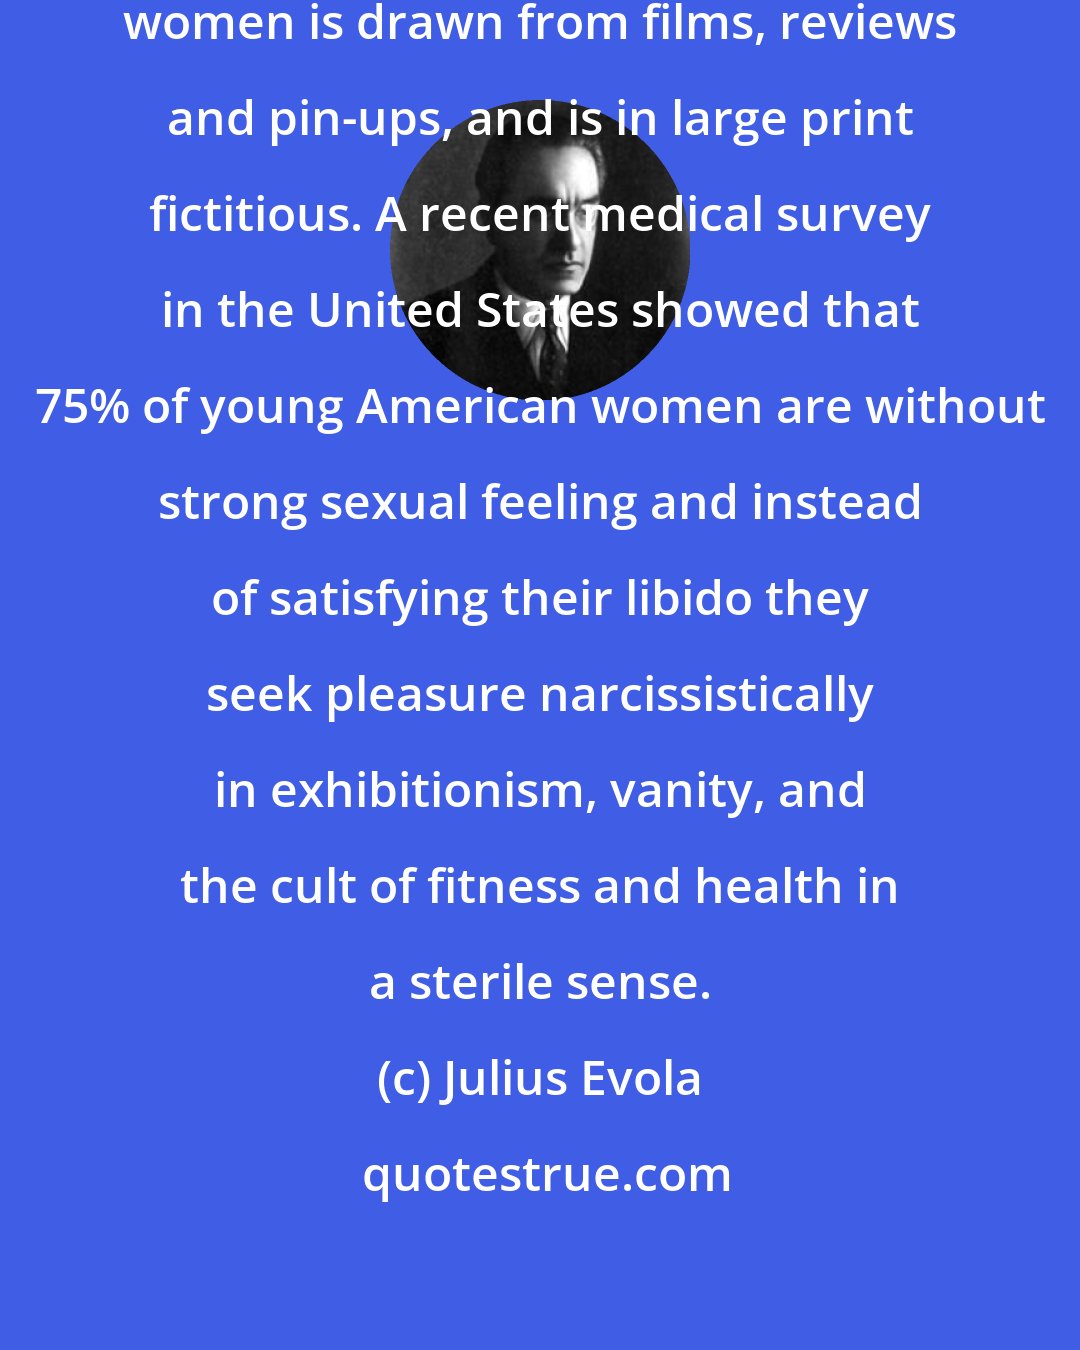 Julius Evola: The much-vaunted sex appeal of American women is drawn from films, reviews and pin-ups, and is in large print fictitious. A recent medical survey in the United States showed that 75% of young American women are without strong sexual feeling and instead of satisfying their libido they seek pleasure narcissistically in exhibitionism, vanity, and the cult of fitness and health in a sterile sense.